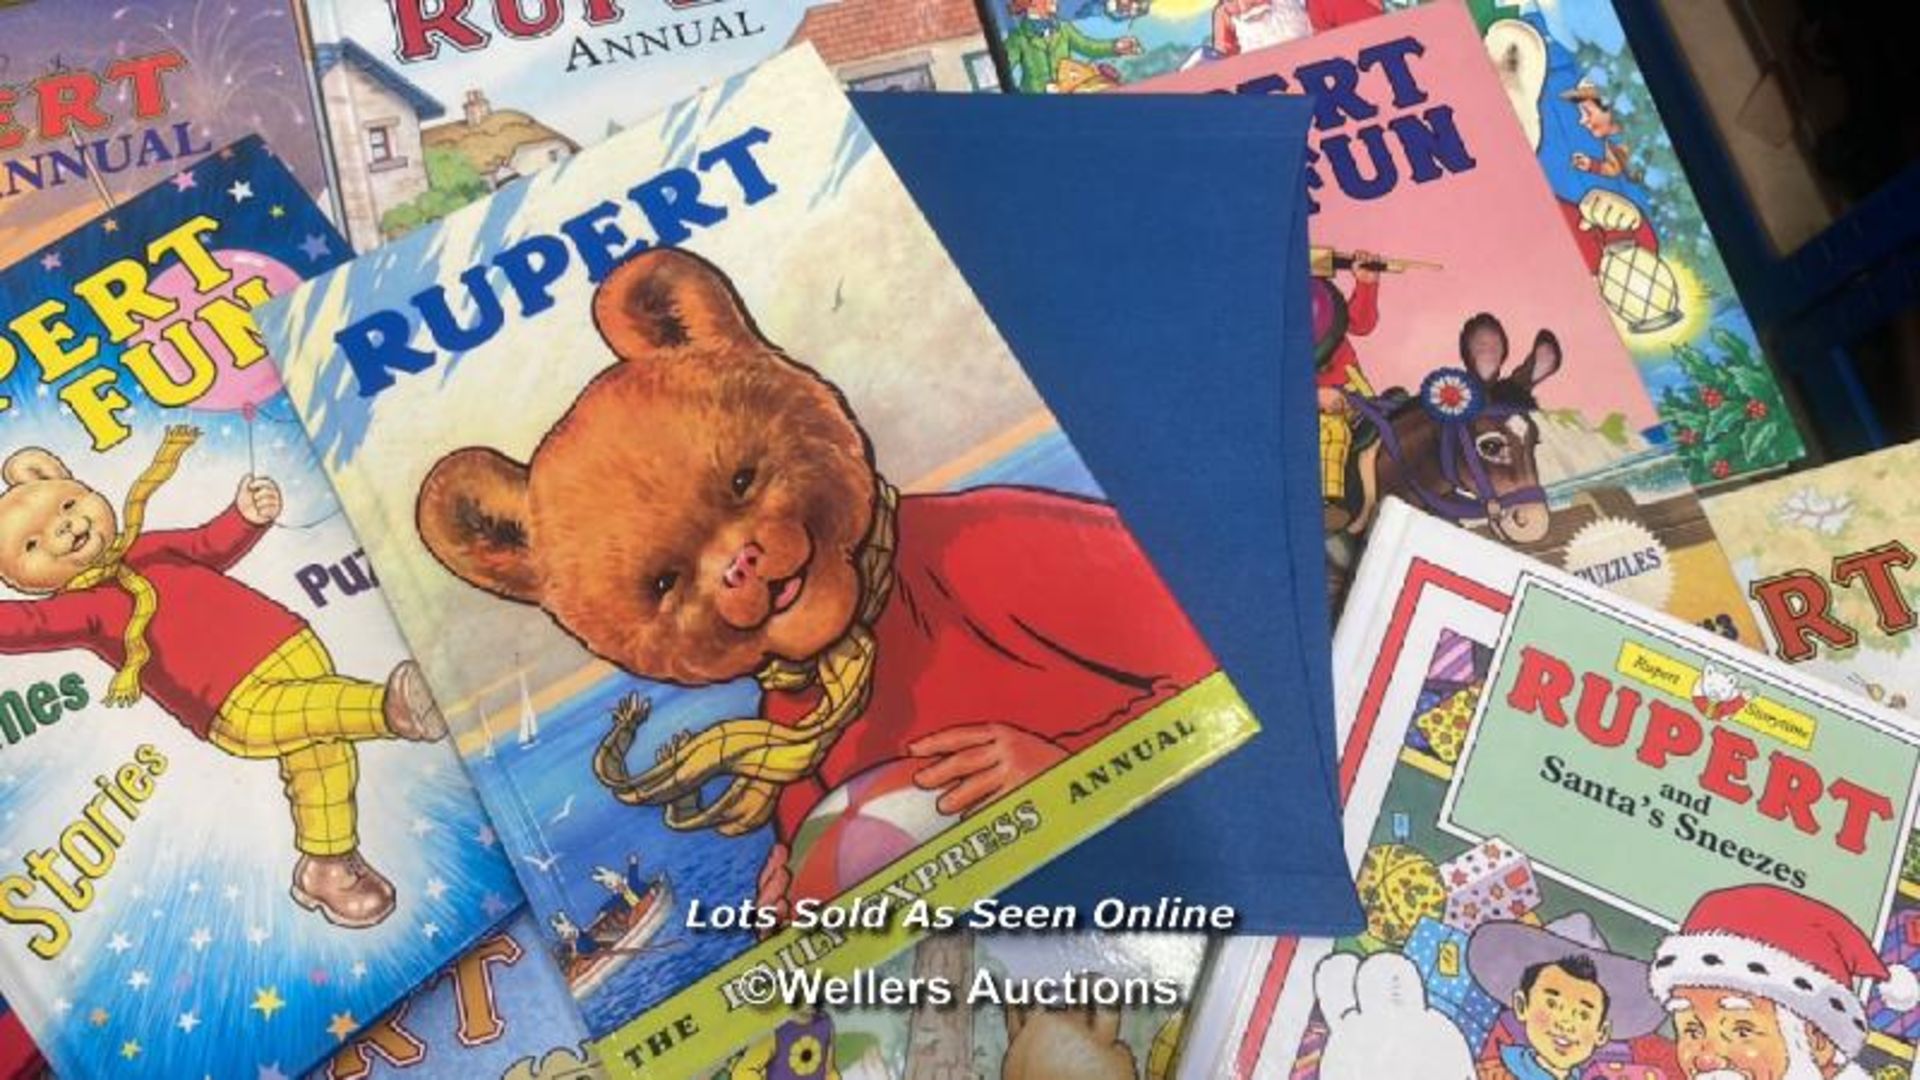 A COLLECTION OF MODERN 1990'S - 2000'S RUPERT BEAR BOOKS AND ANNUALS INCLUDING 1959 ANNUAL LIMITED - Image 2 of 7